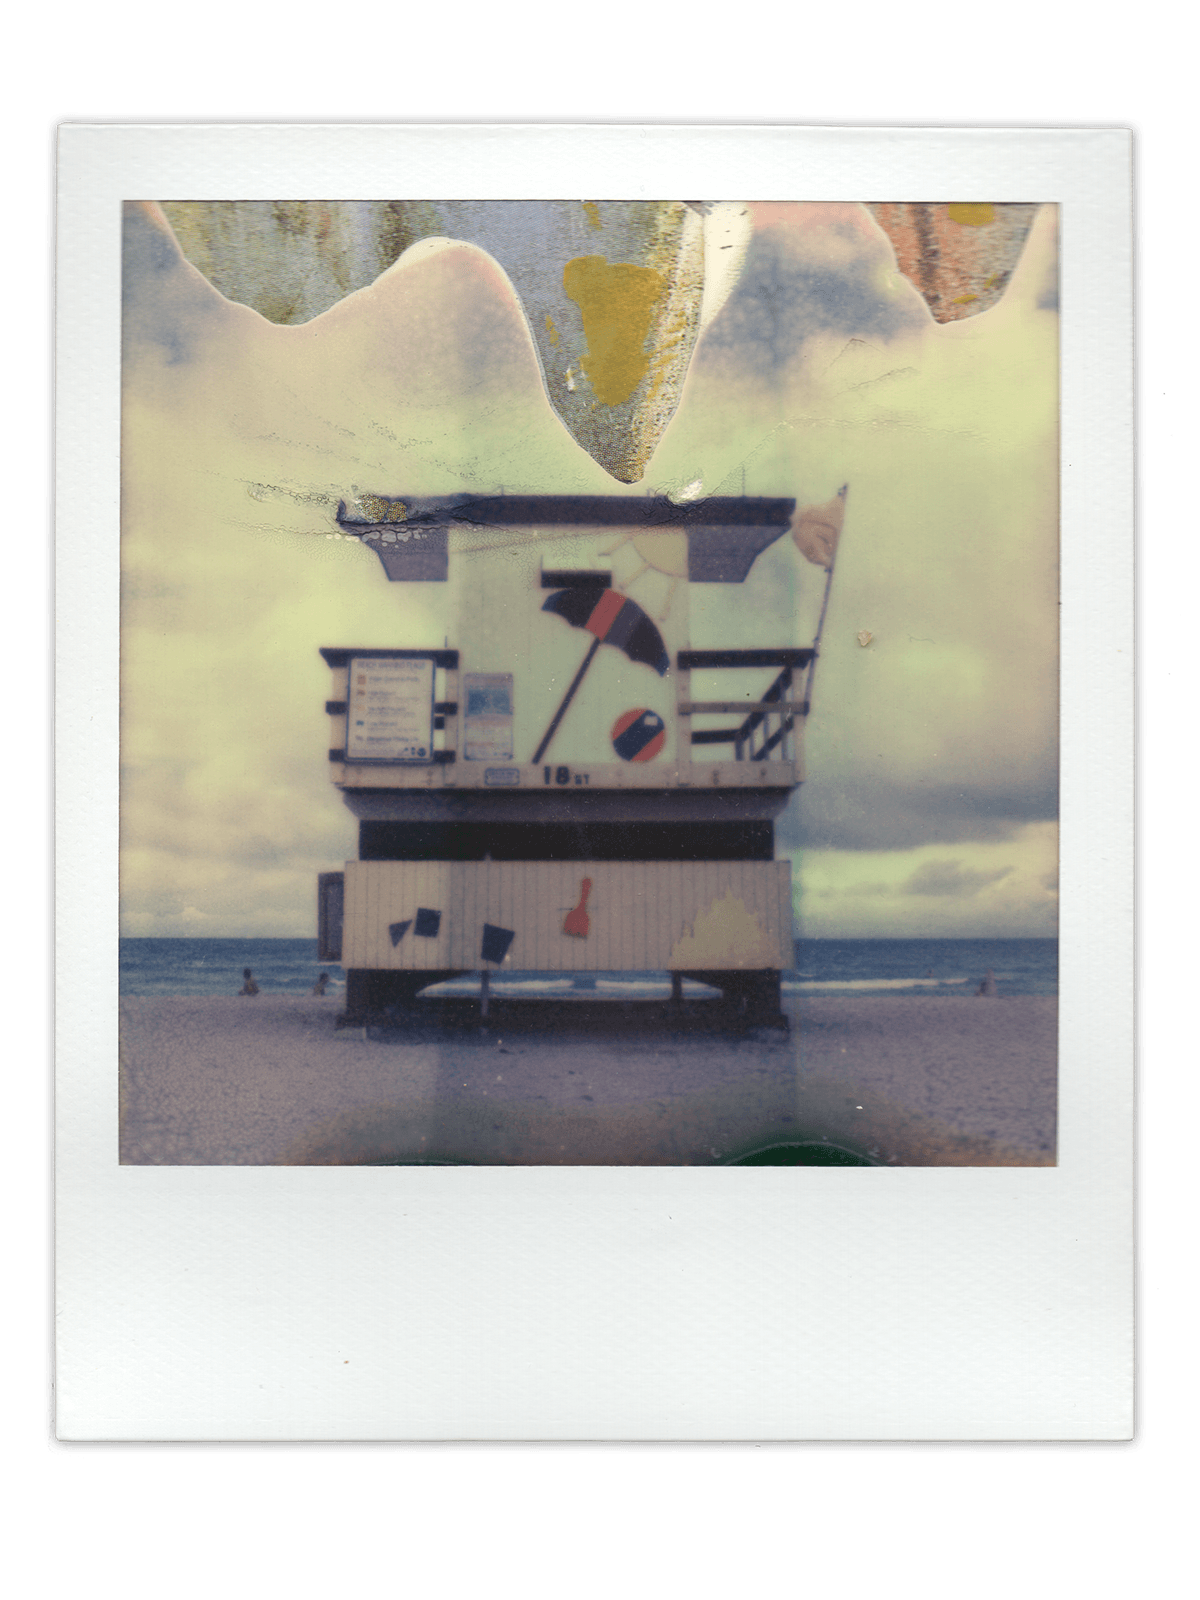 miami south beach POLAROID The Impossible Project PX-70 collage Cameron Wyckoff in.prnthtkls inprnthtkls in (prn.th tkl)S Jot&Dollop